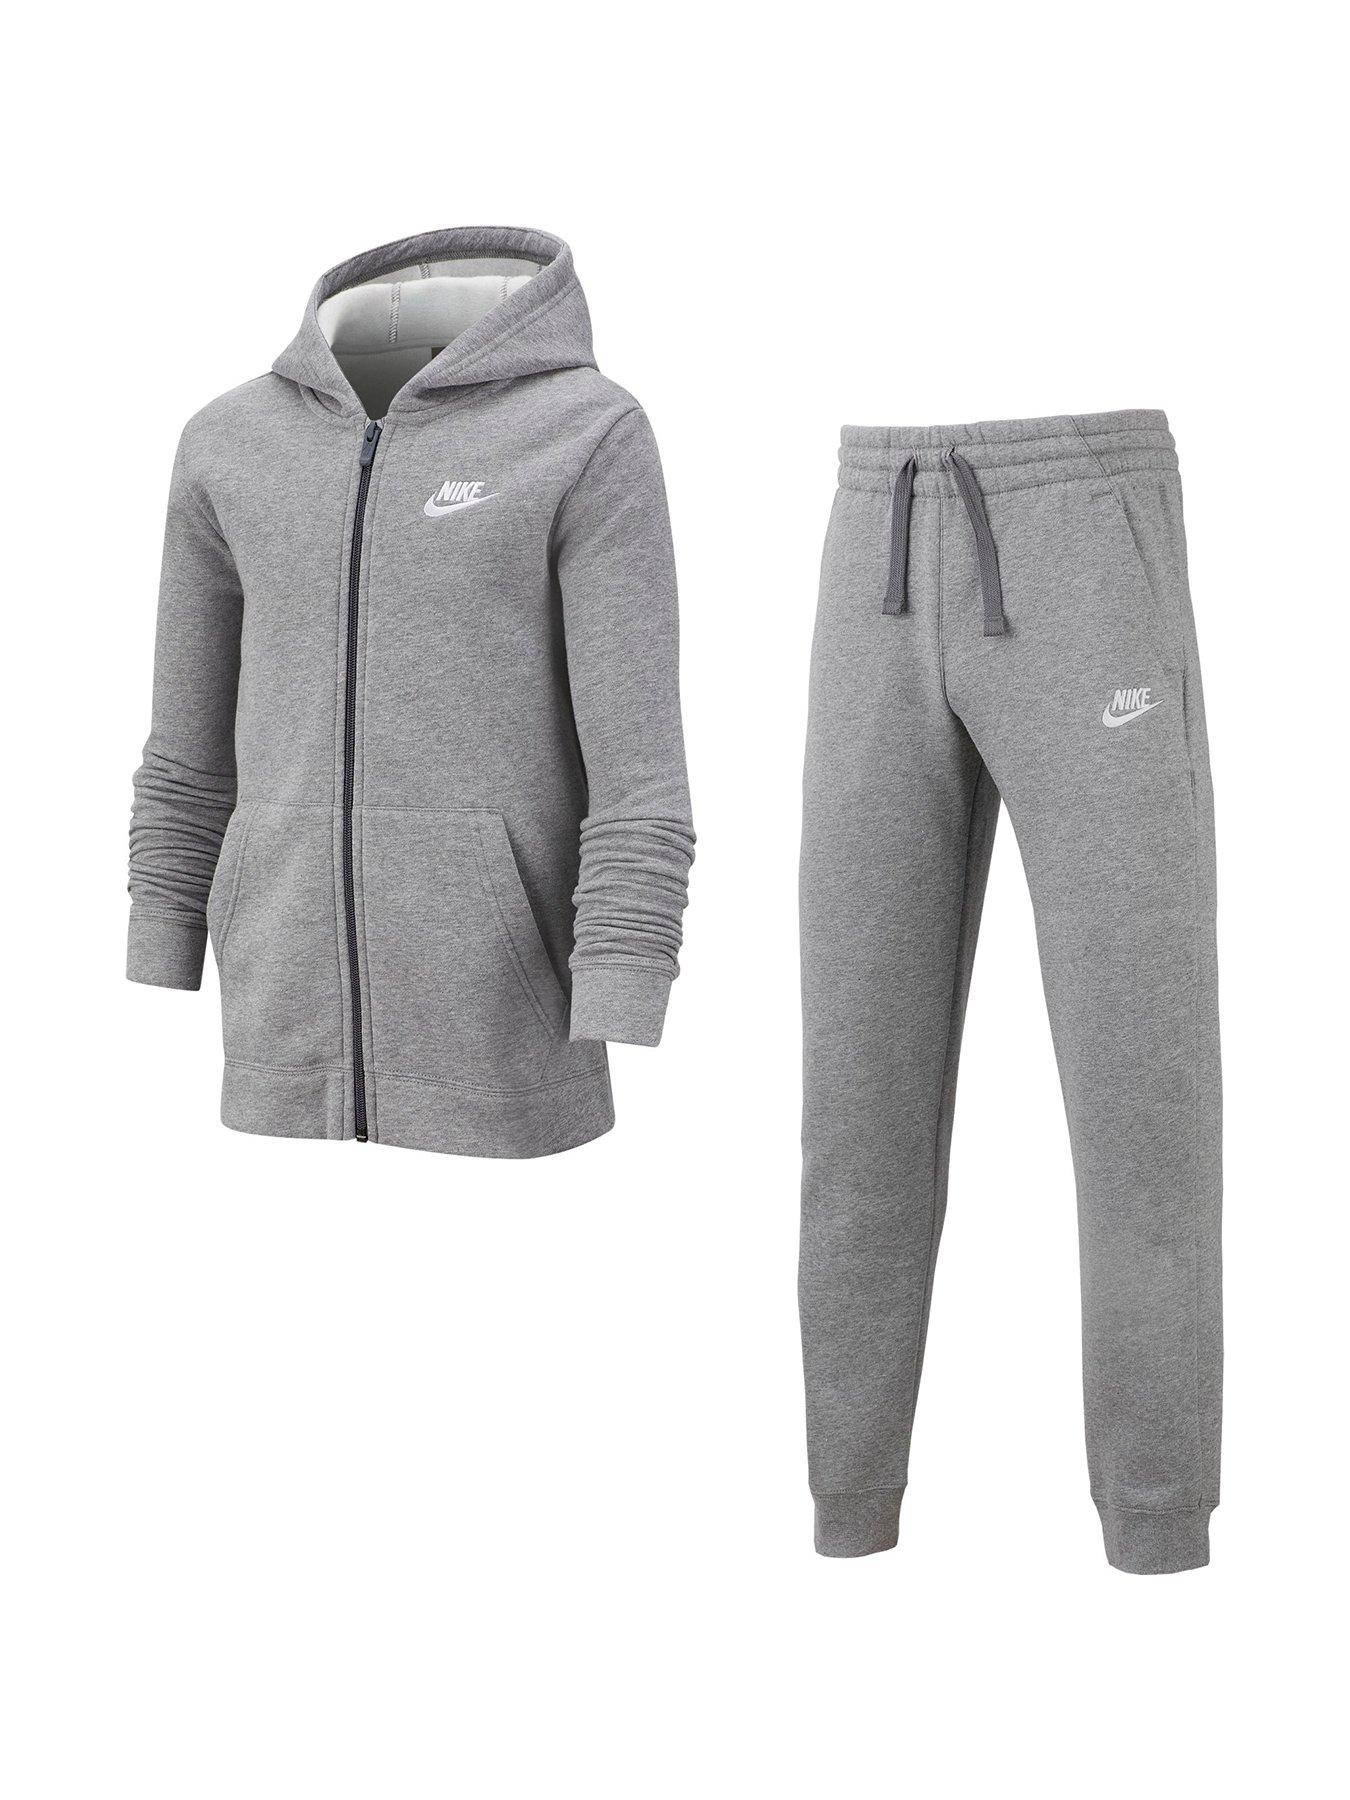 his and hers nike jogging suits